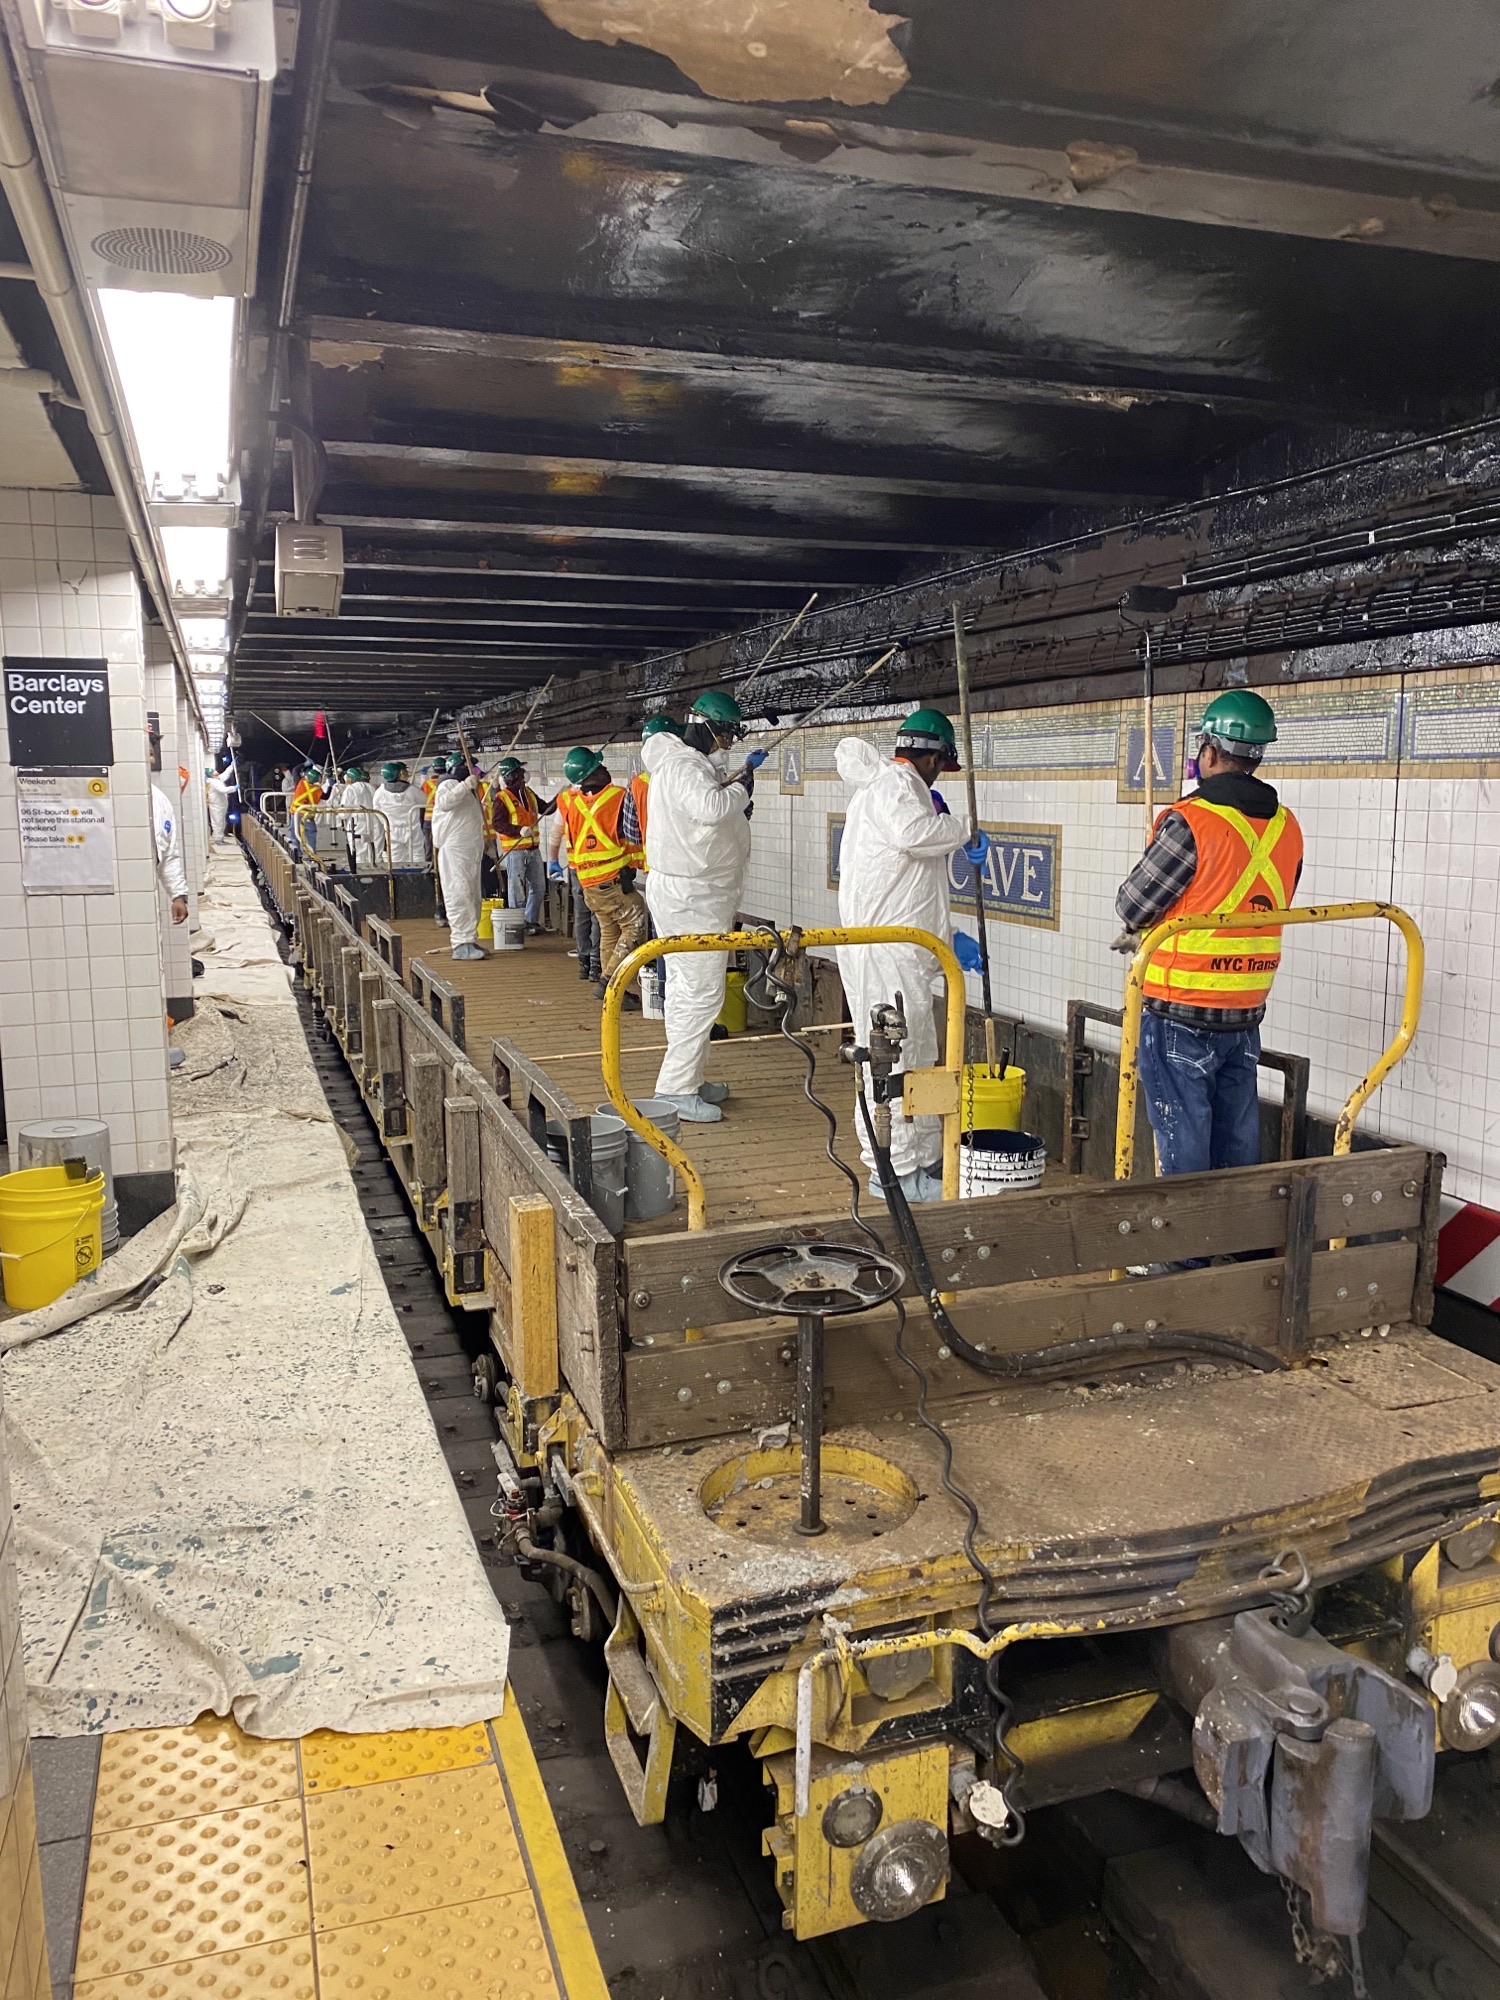 The Metropolitan Transportation Authority (MTA) today announced crews have completed renovation of the Atlantic Av-Barclays Center BQ subway station in Brooklyn as part of New York City Transit’s Re-NEW-vation campaign to bring targeted resources to rebuild components of the station within a 55-hour window. 